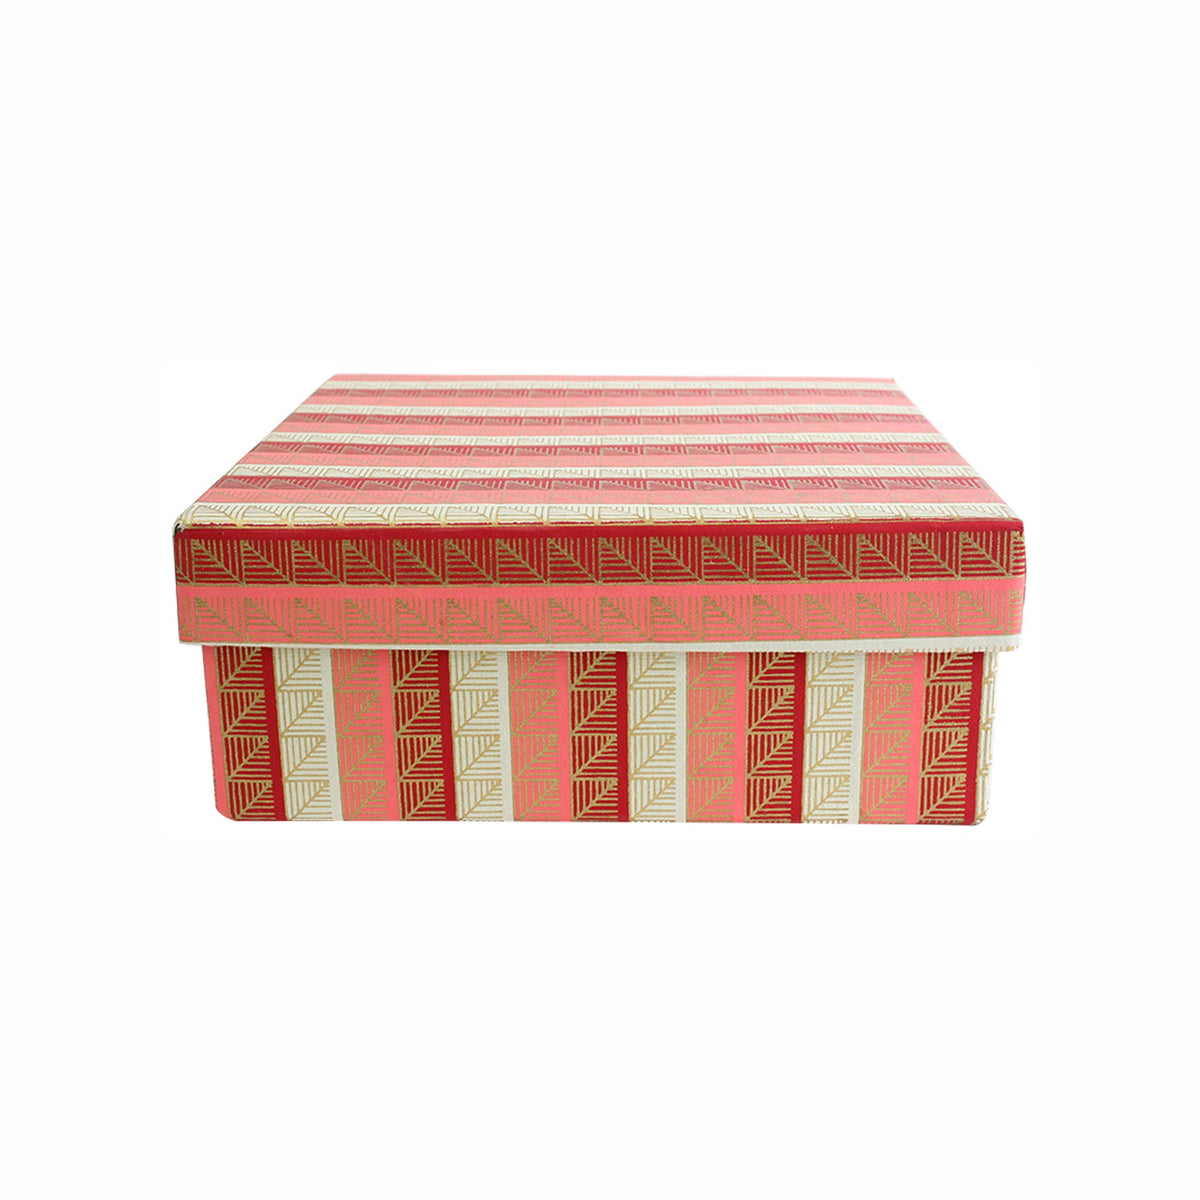 Handmade Chevron Patterned Red/Gold Gift Box - Single (Sizes Available)